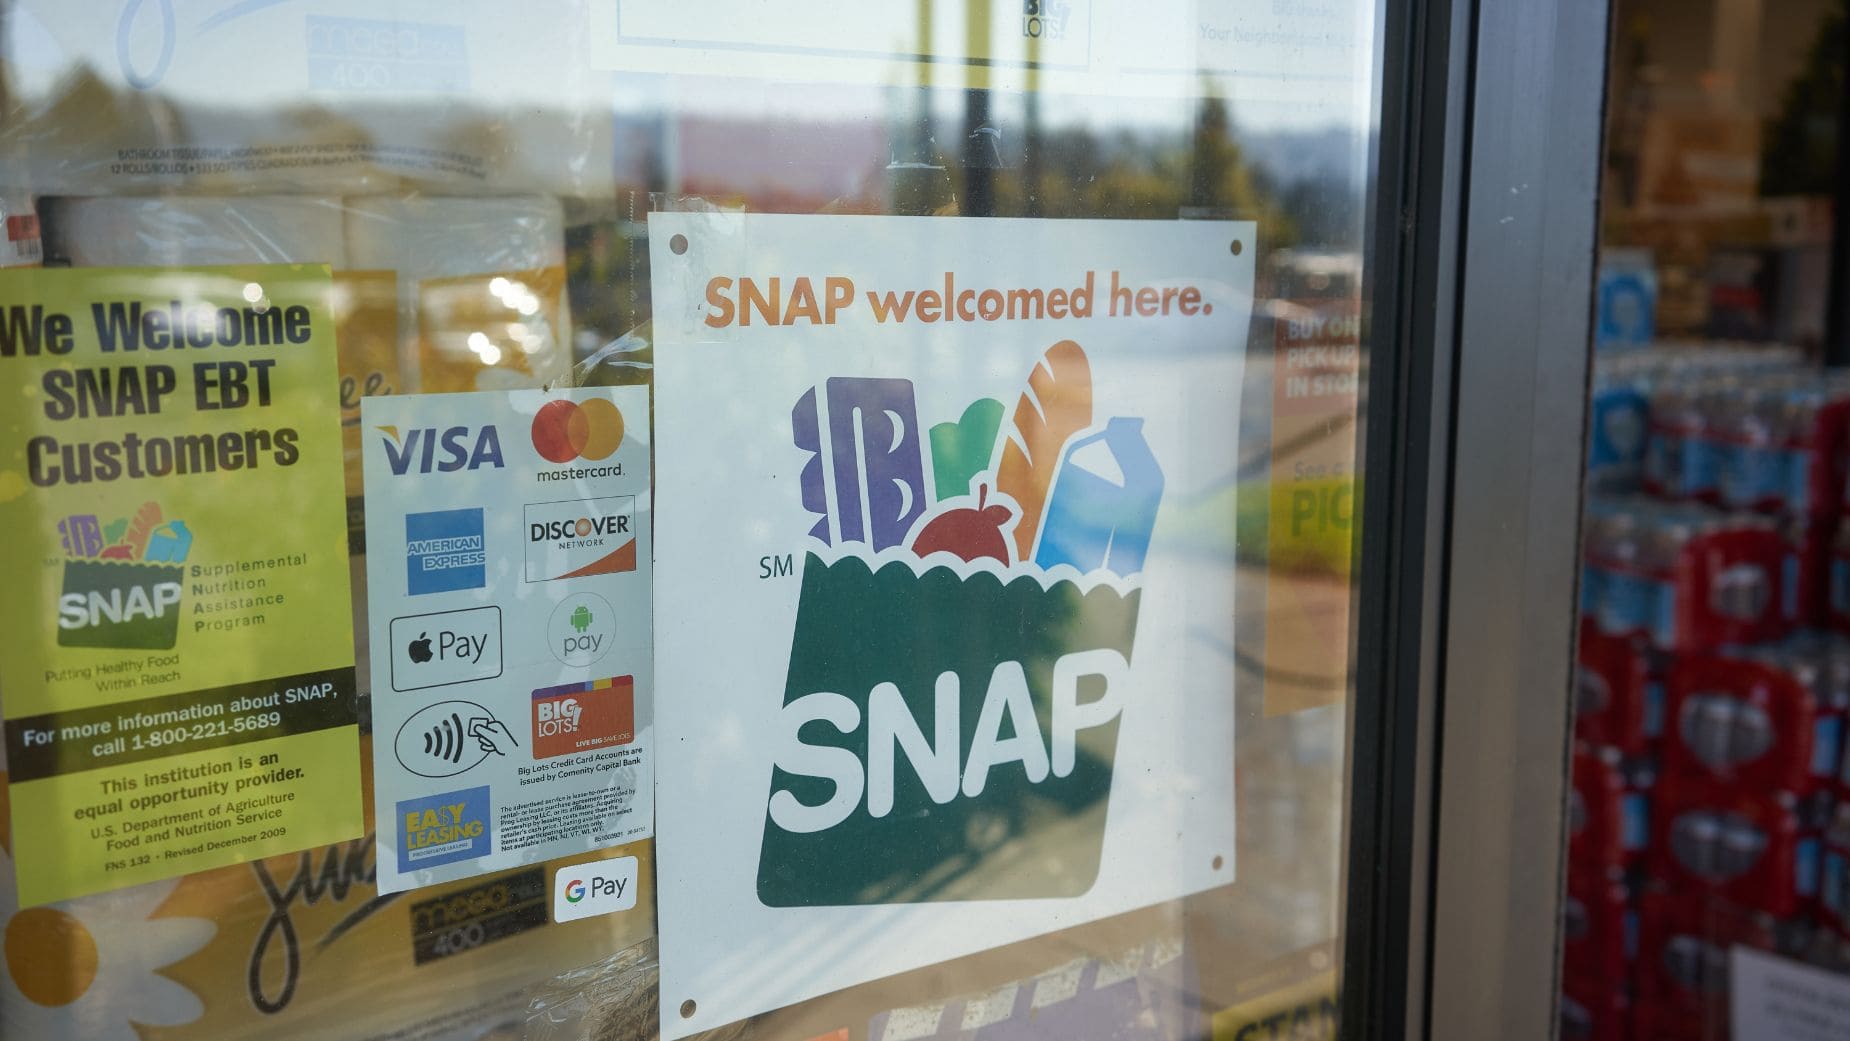 You can use your SNAP food Stamps in some shops